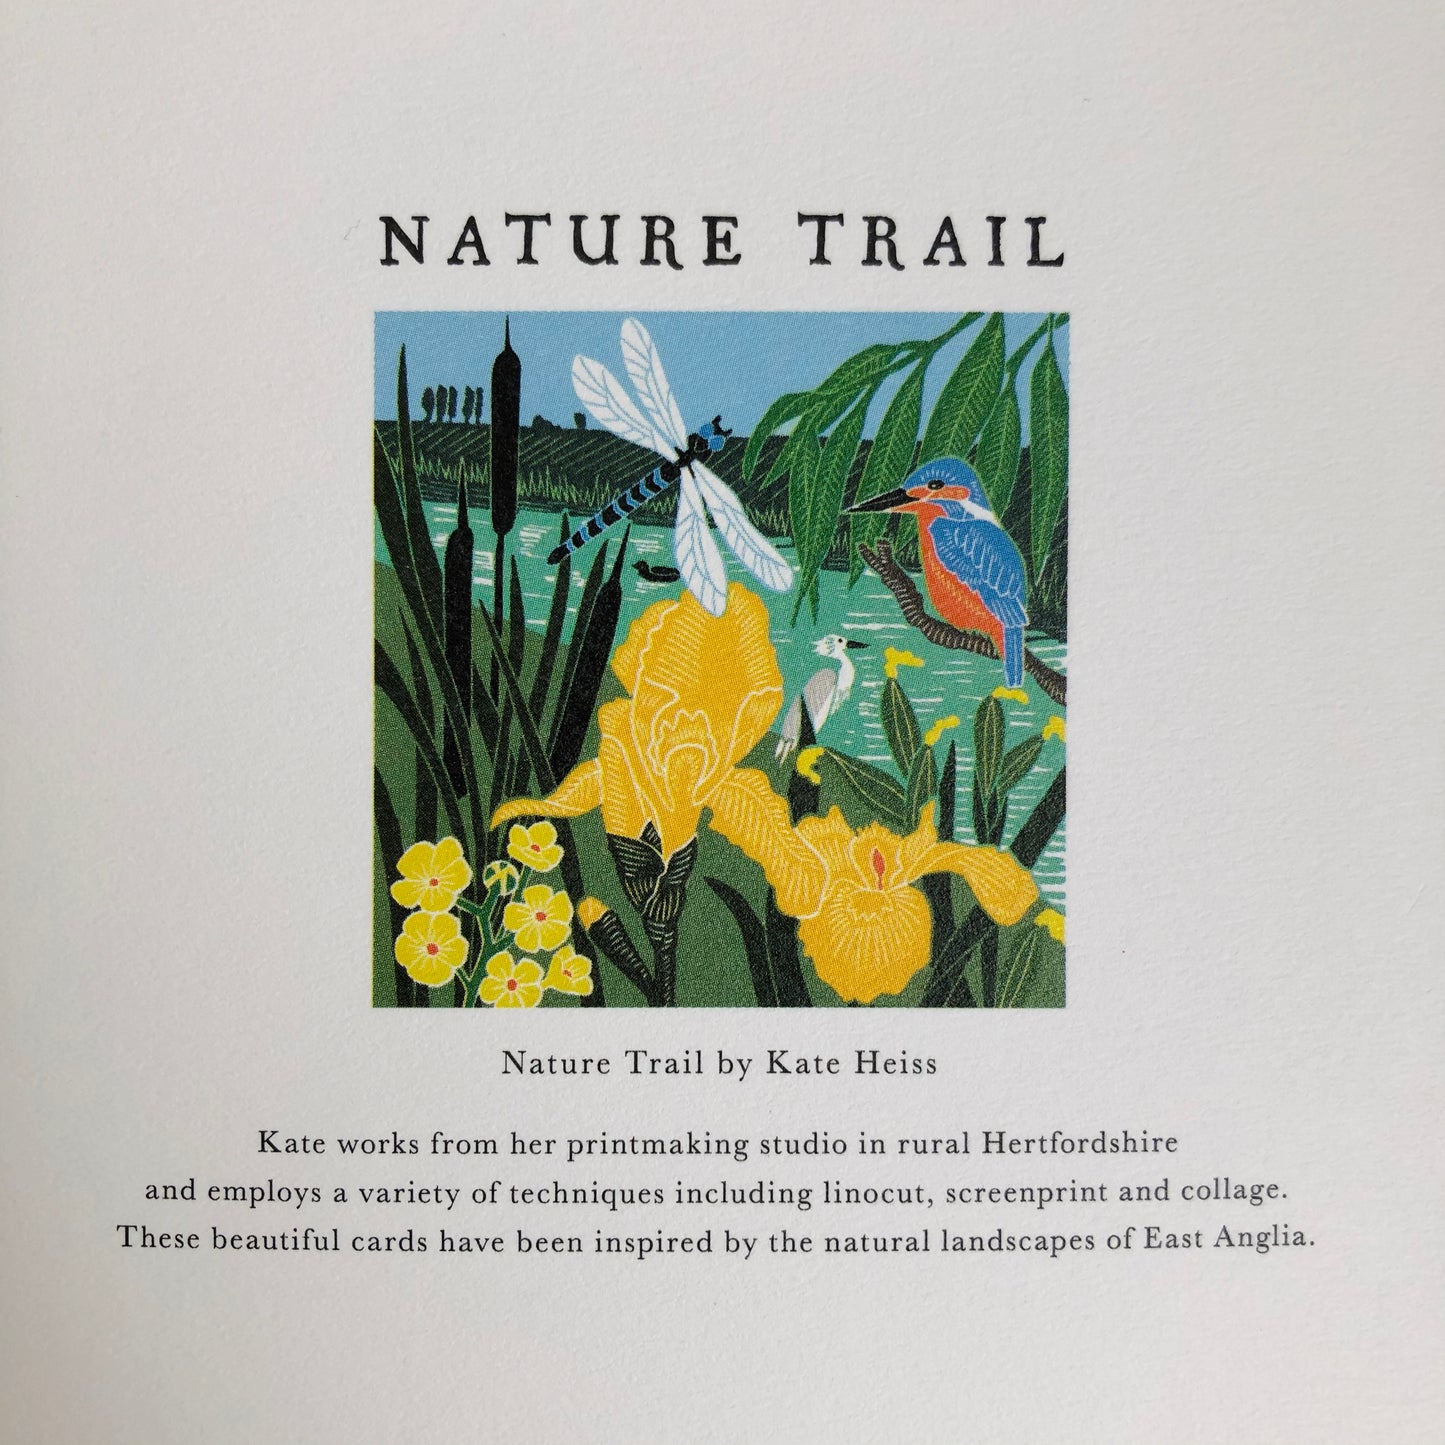 Kingfisher and Dragonfly by Kate Heiss, Nature Trail NT14A